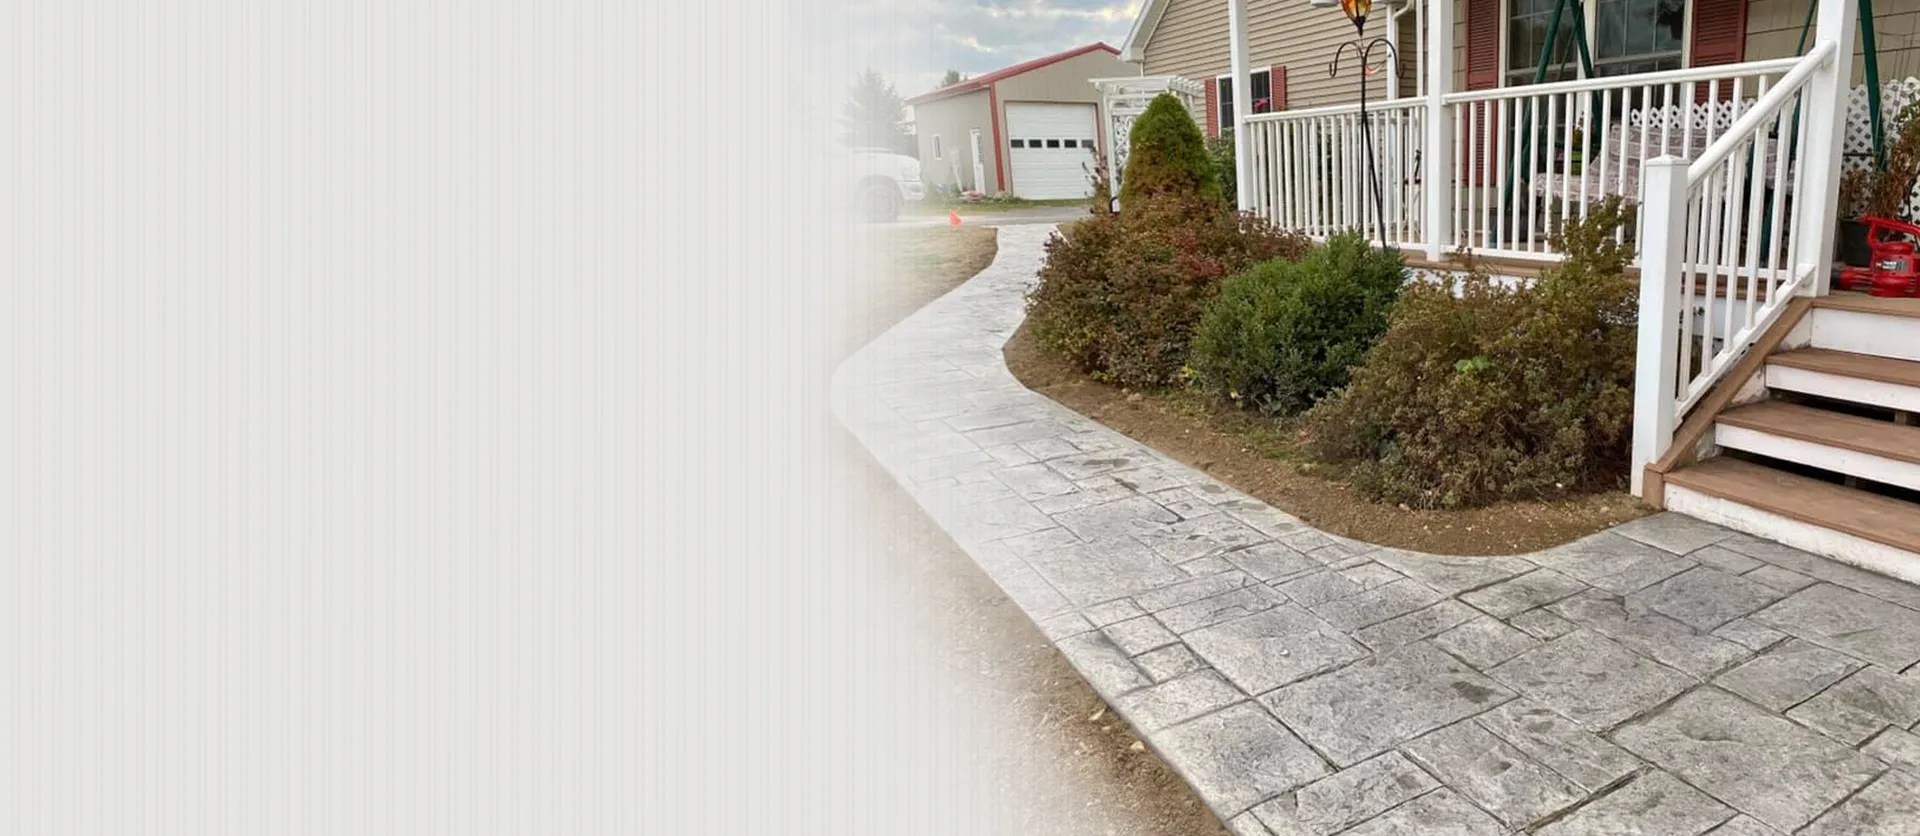 Photo of a front porch sidewalk